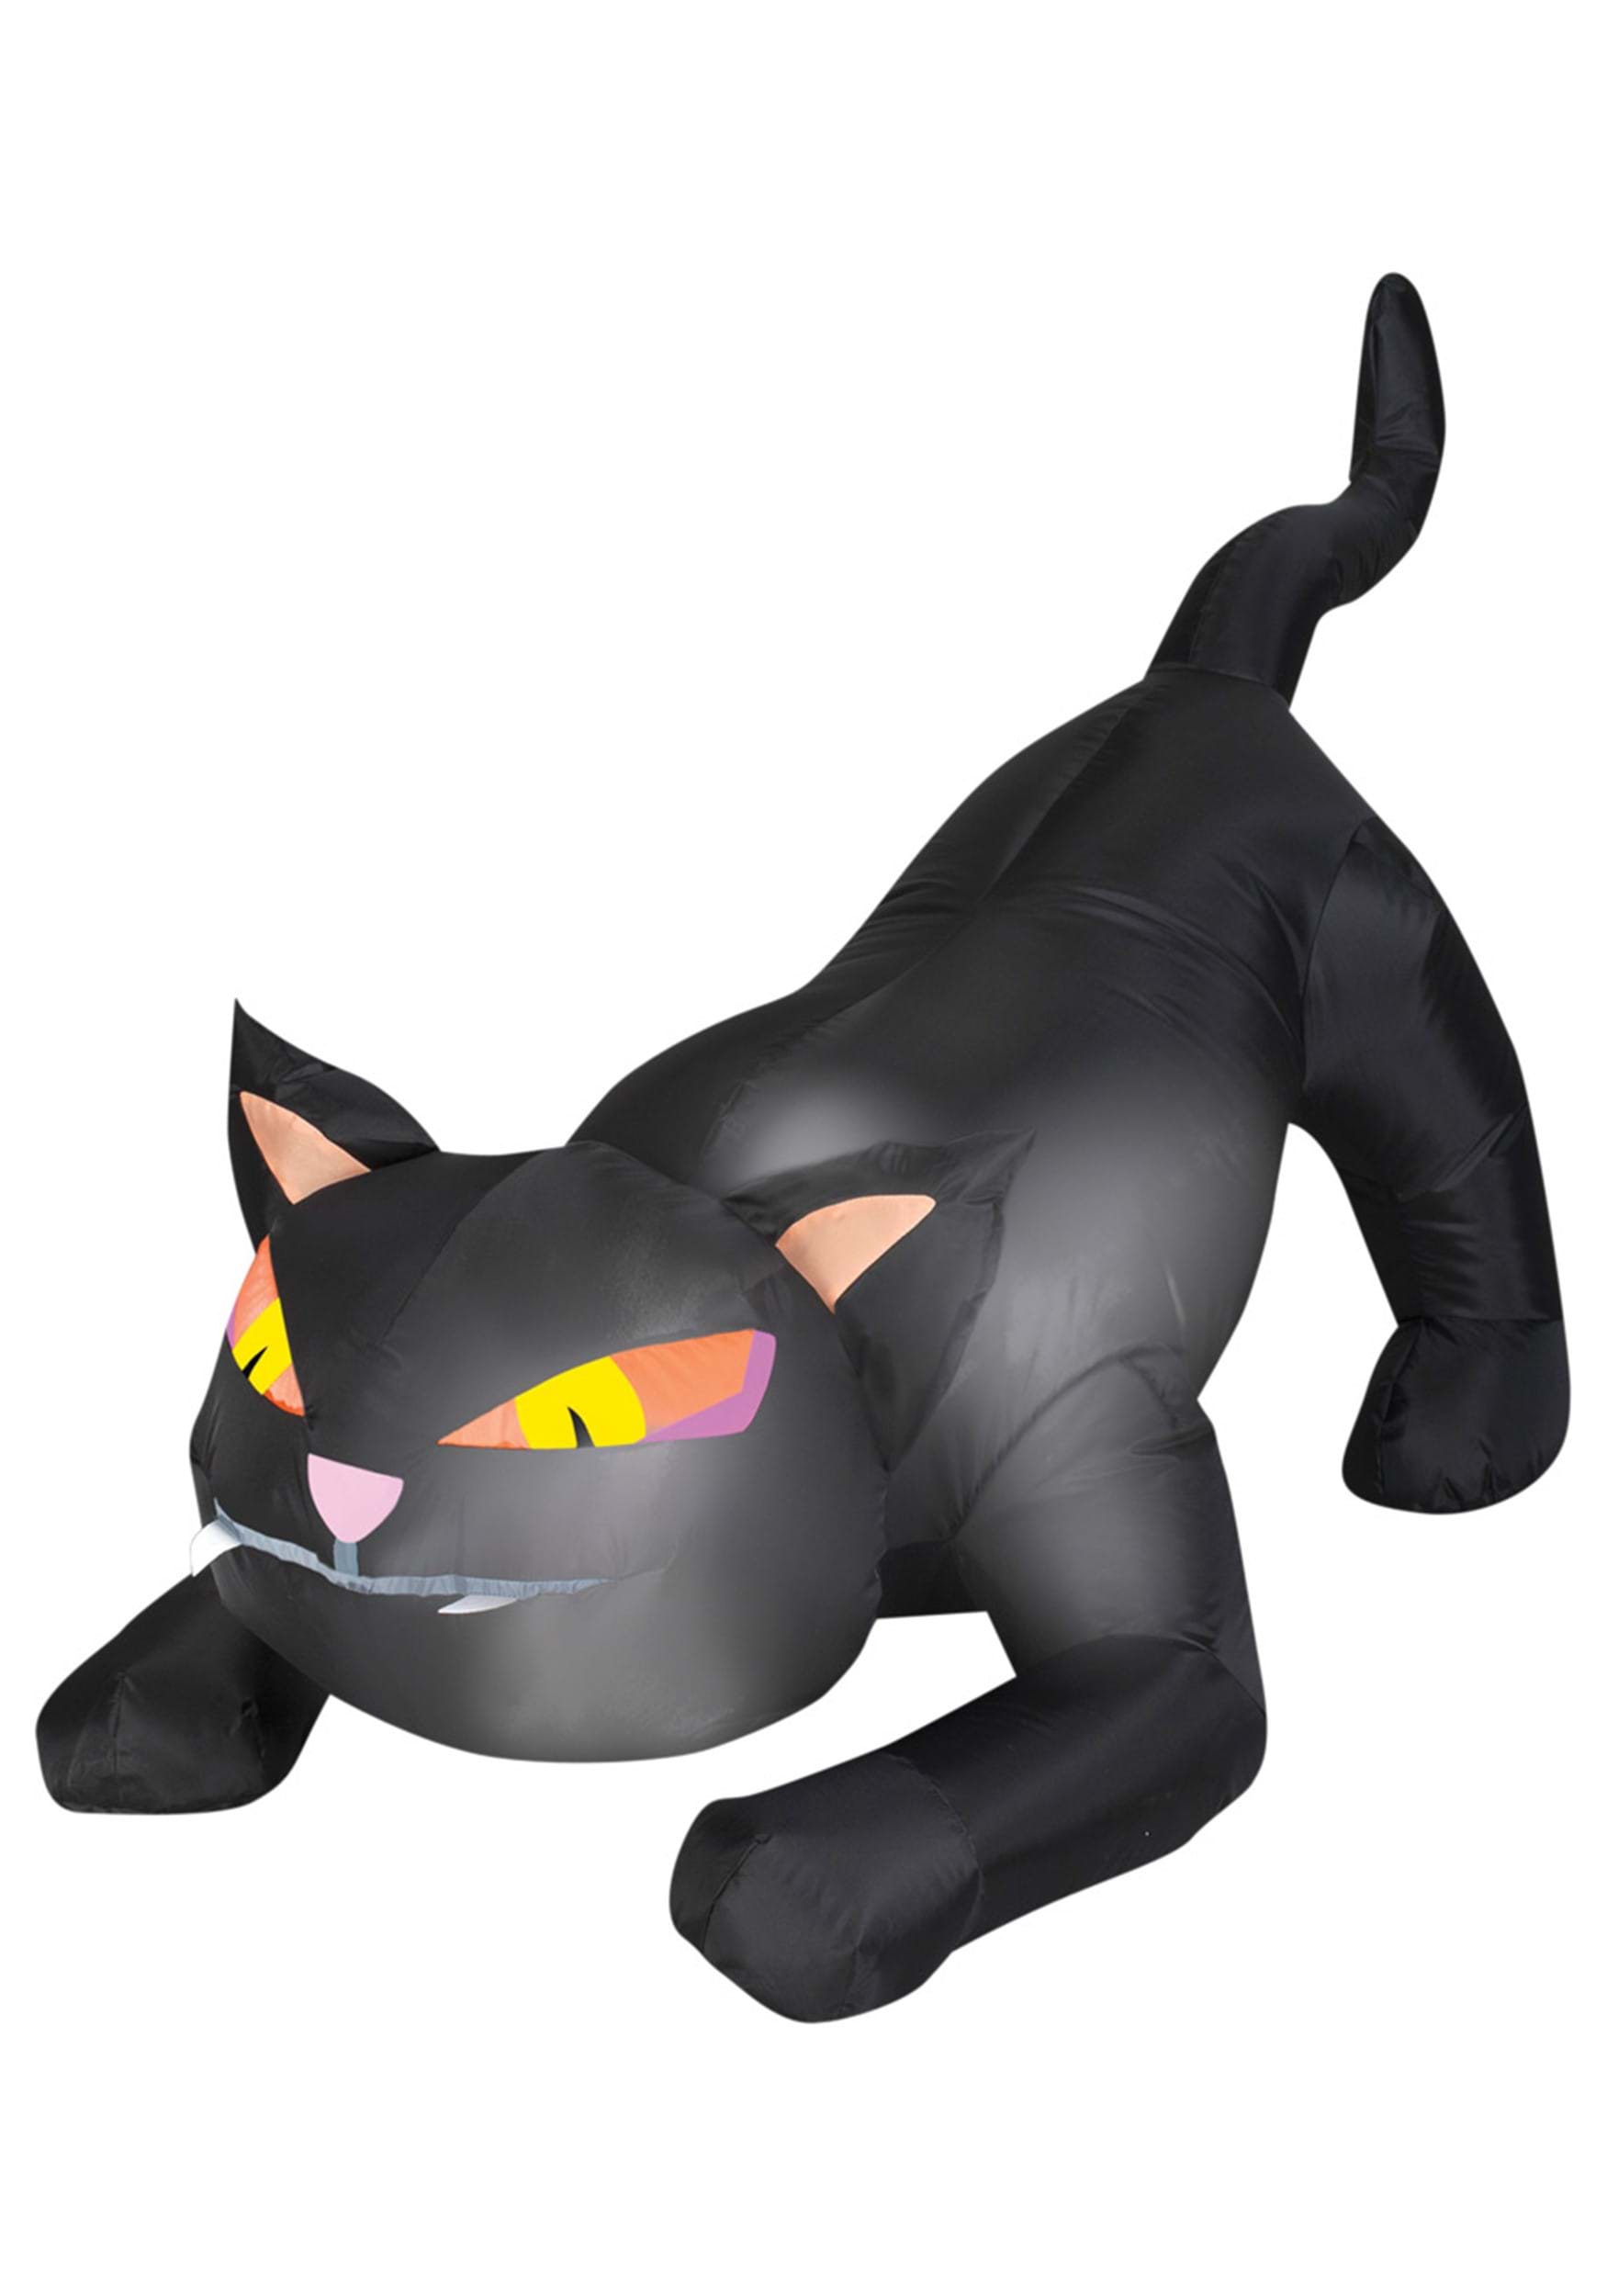 Photos - Other interior and decor Morris Costumes Inflatable Outdoor Small Black Cat Decoration Black/Or 